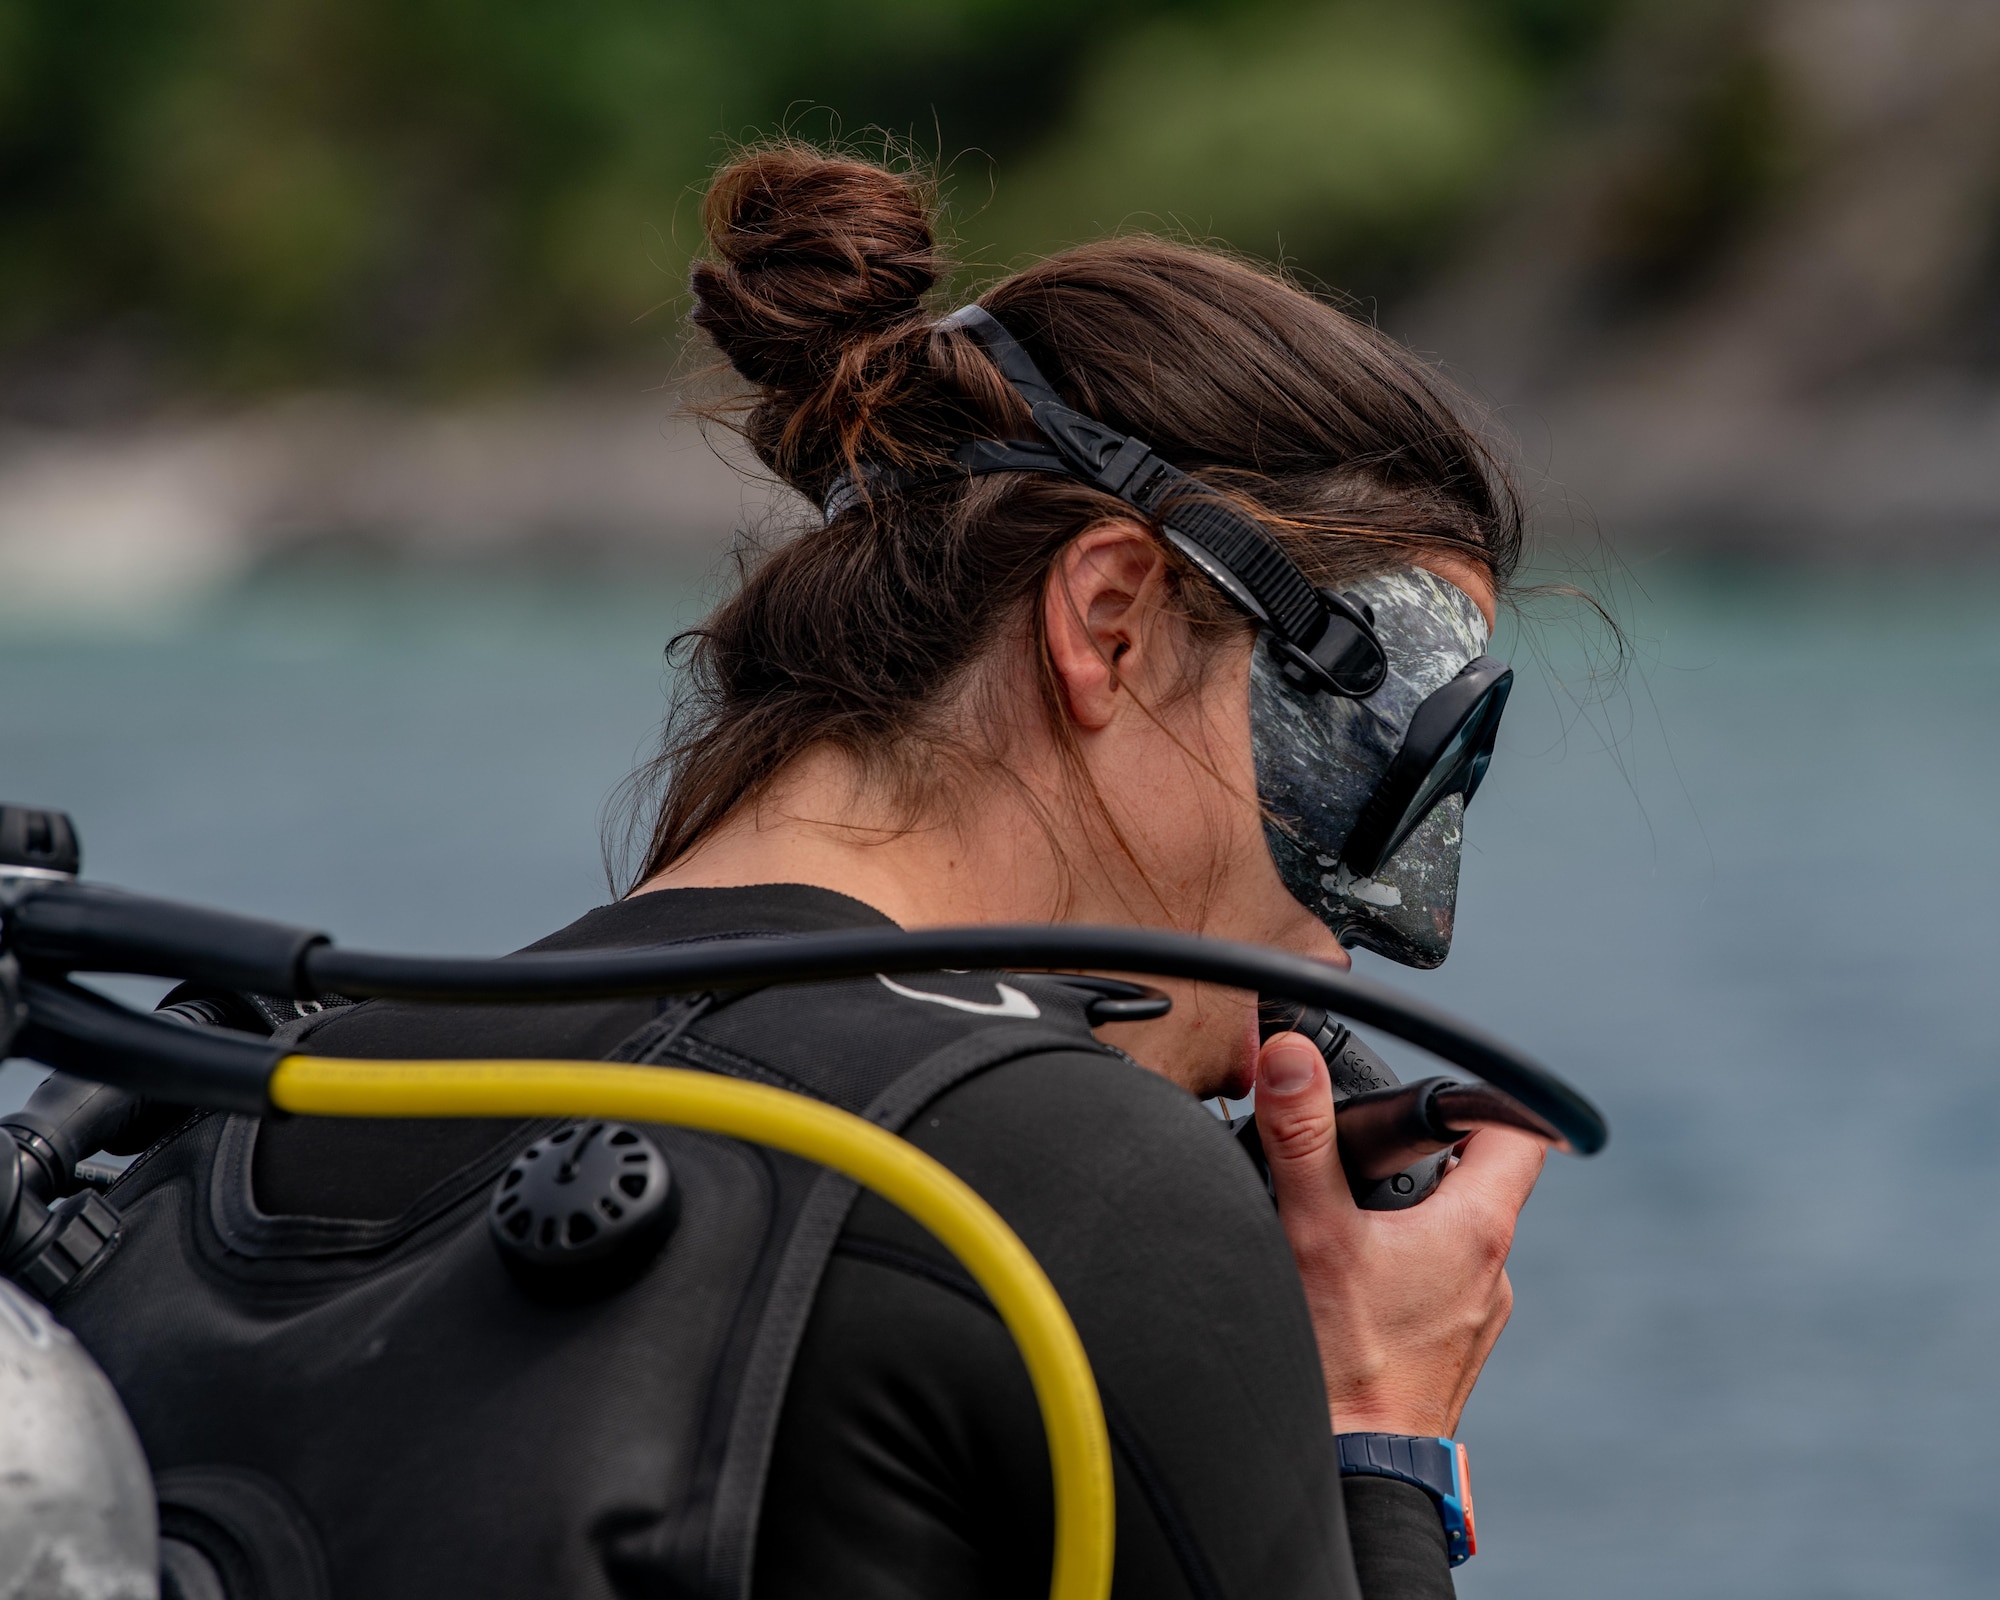 A female diver places a mouthpiece into her mouth